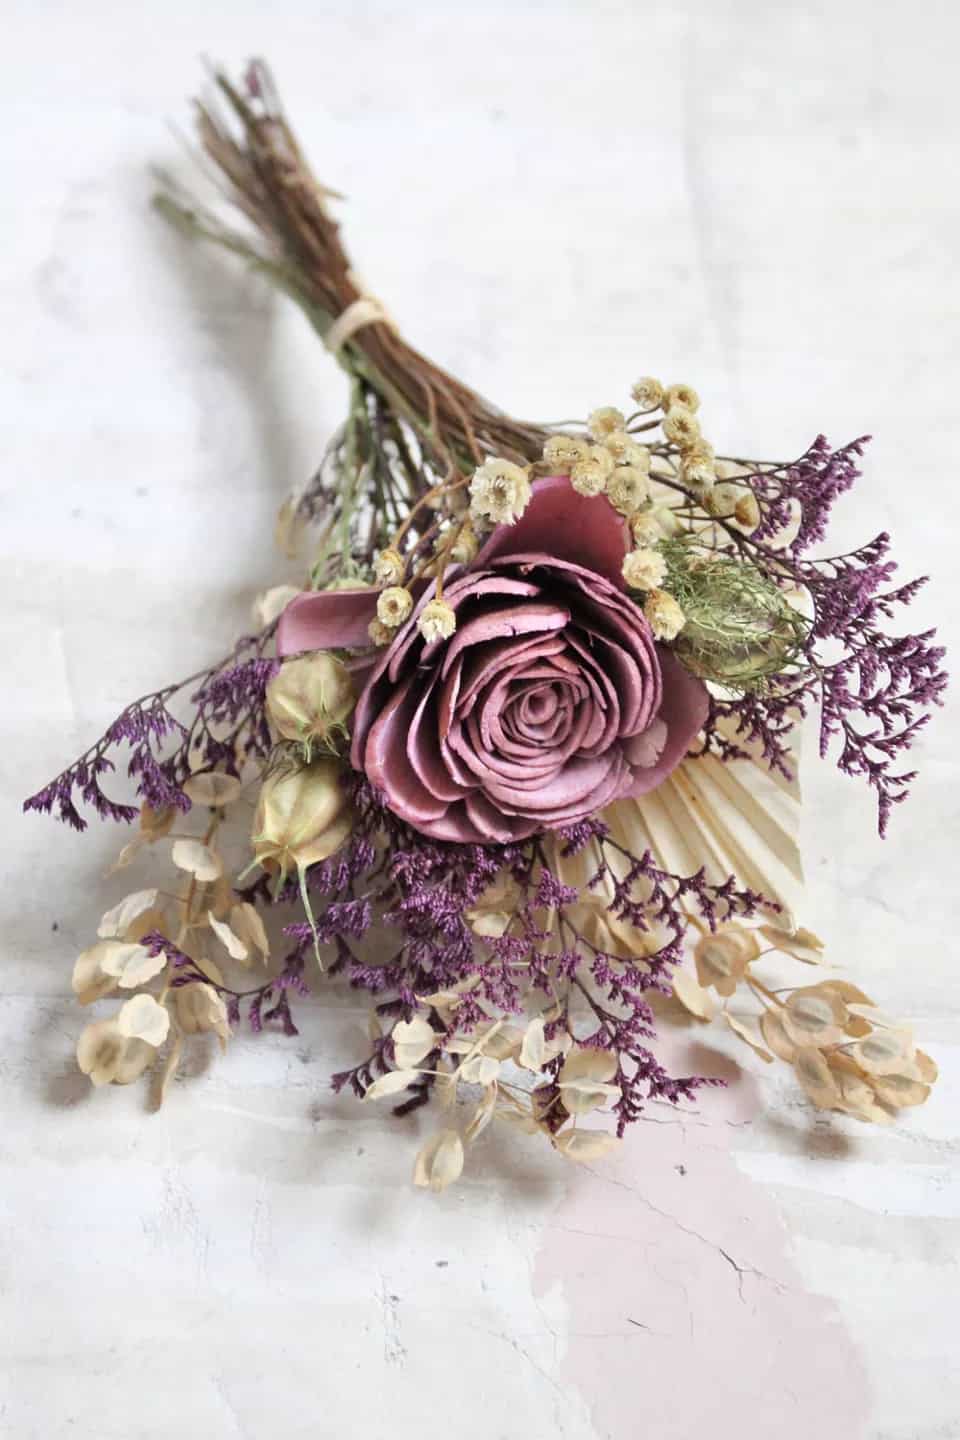 Use Dried Flowers for Low-maintenance Elegance